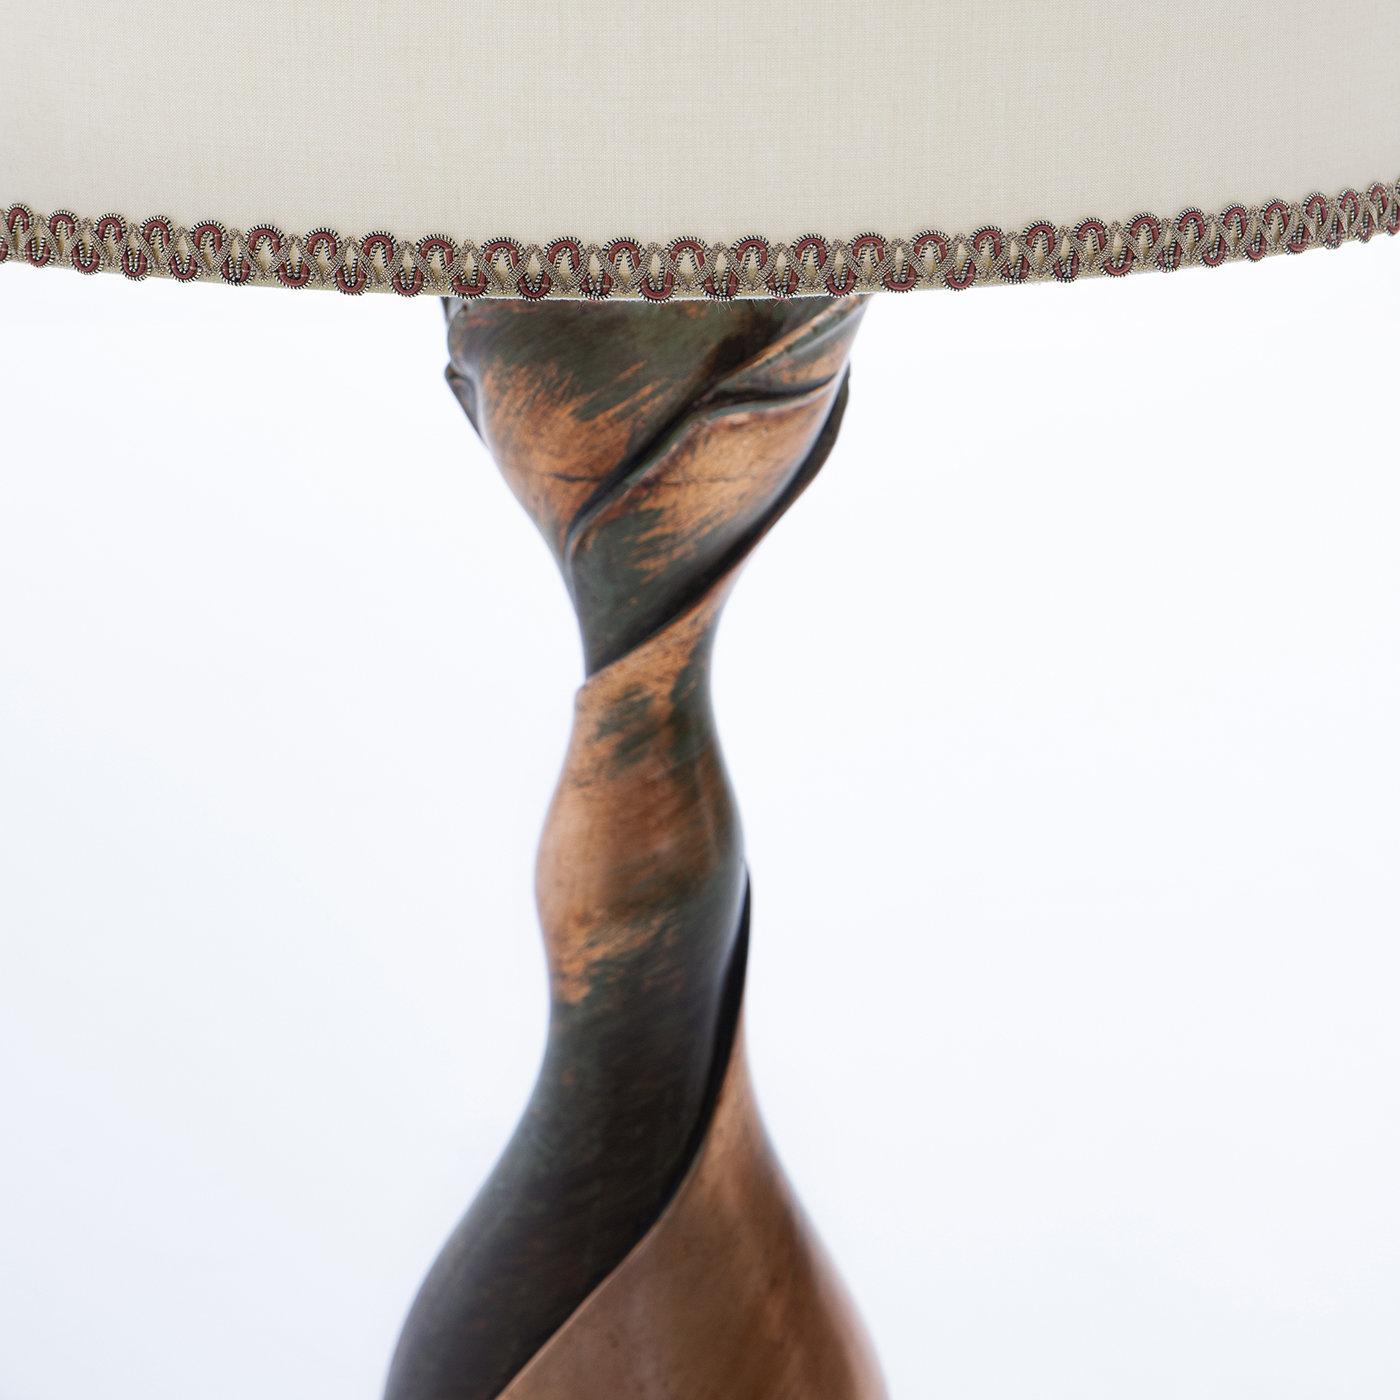 The ephemeral beauty of flowers is conveyed in the finely rendered solid wood base in this sculptural table lamp. Entirely covered in copper leaf boasting a satin and antiqued finish, the slender support for the lampshade gracefully stems from a